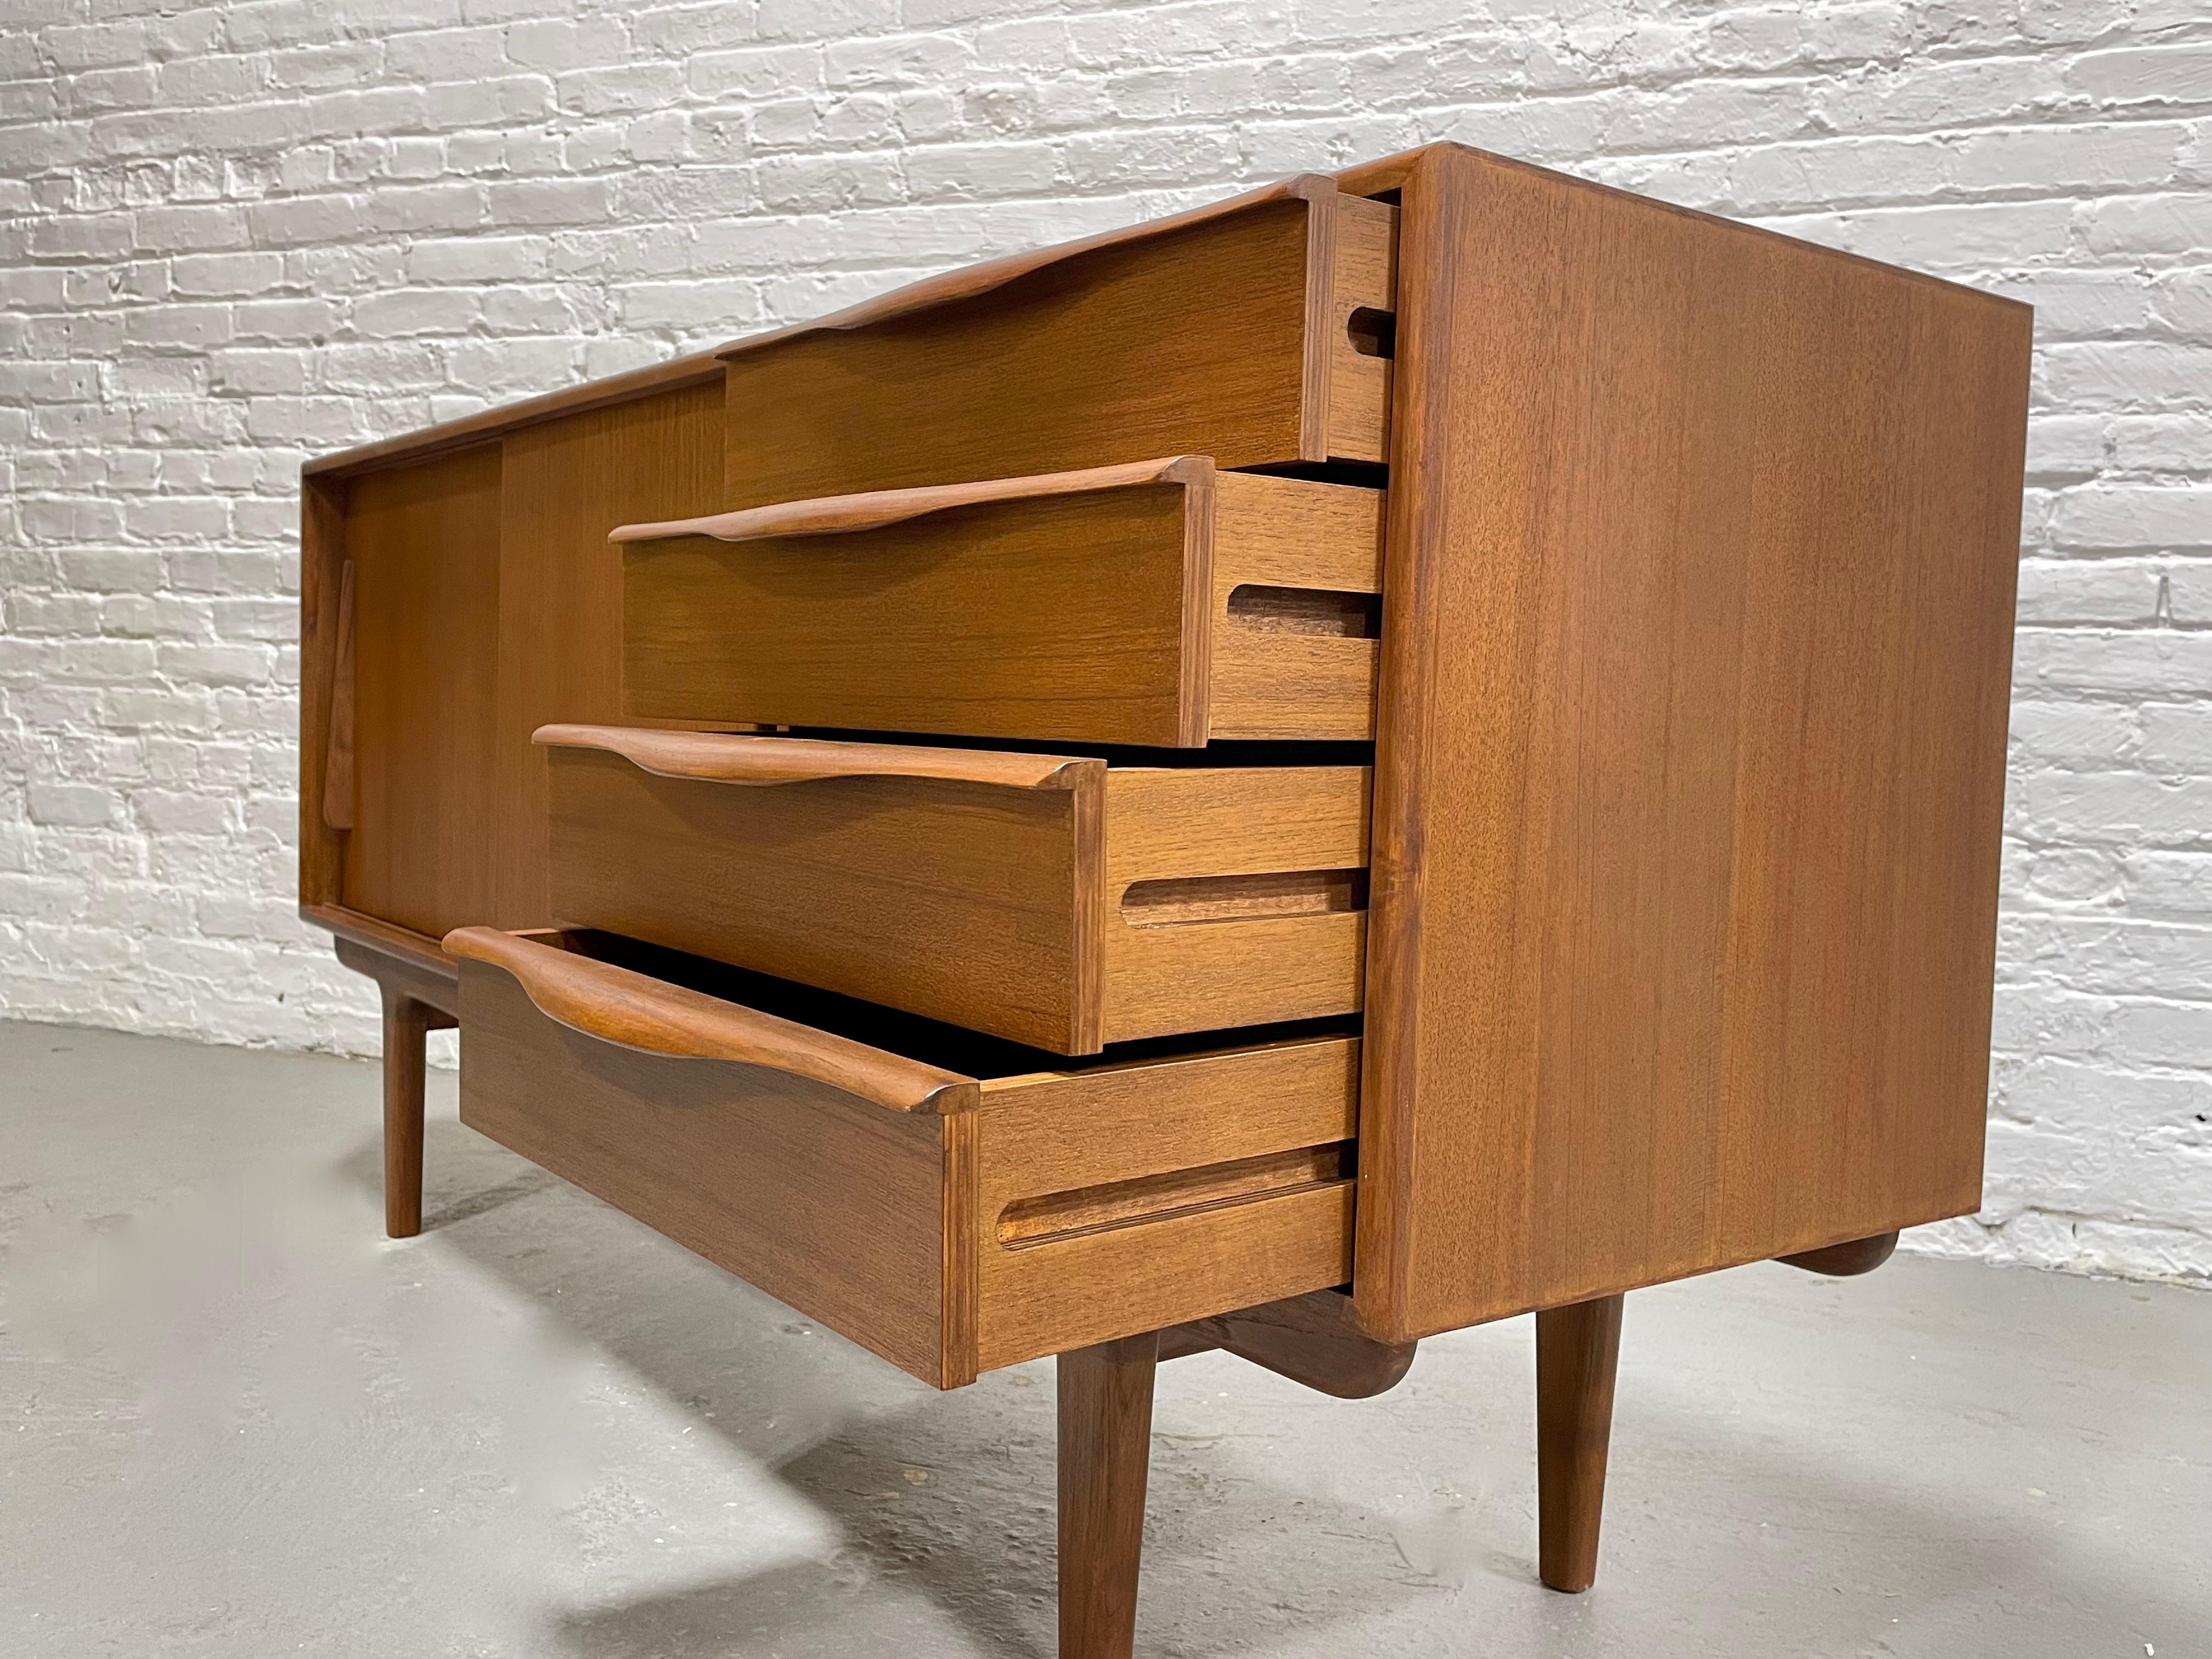 Sculptural Mid-Century Modern Styled Credenza / Media Stand / Sideboard For Sale 5